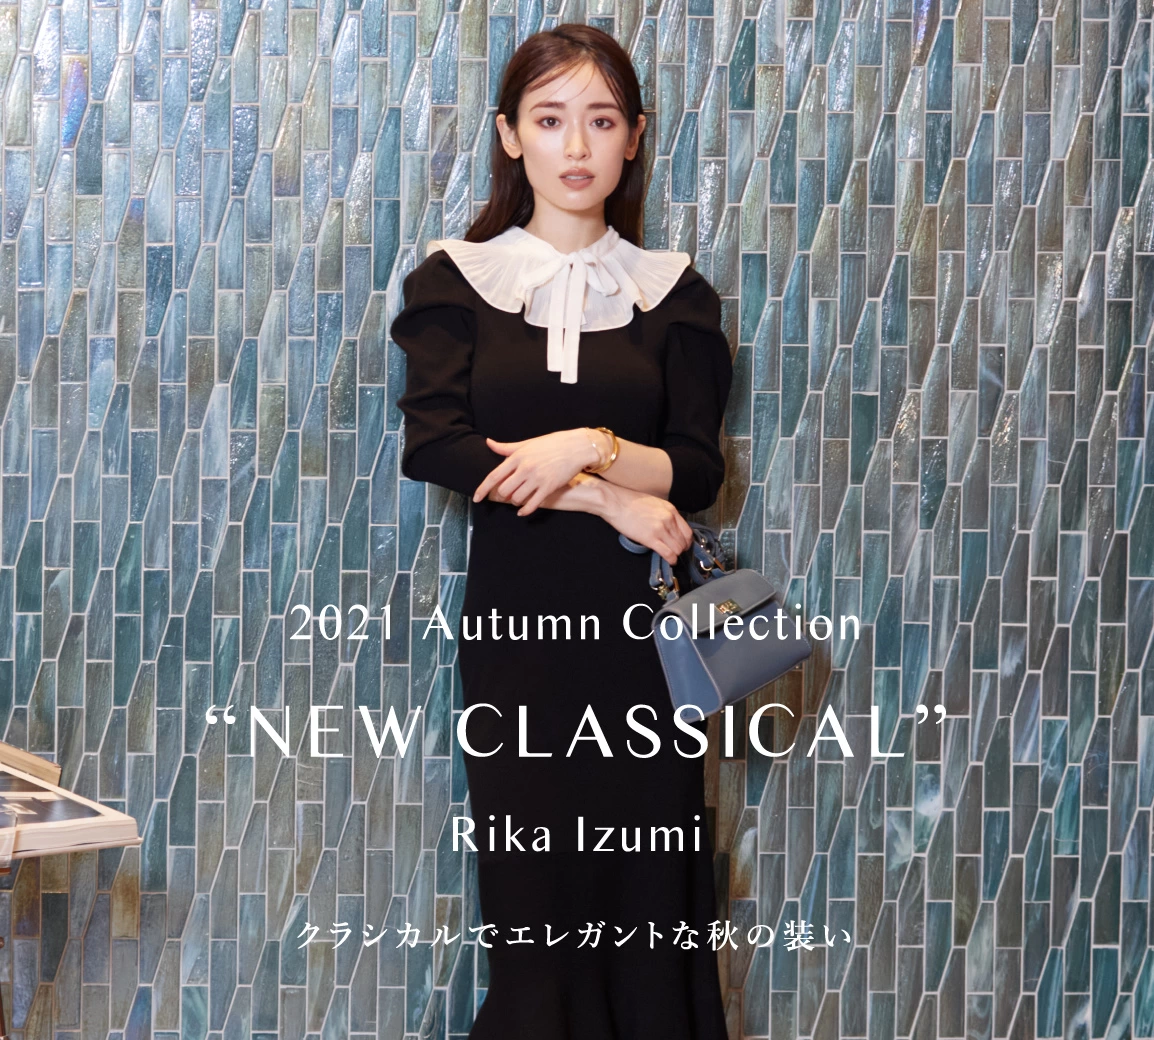 2021 Autumn Collection “NEW CLASSICAL” with Rika Izumi